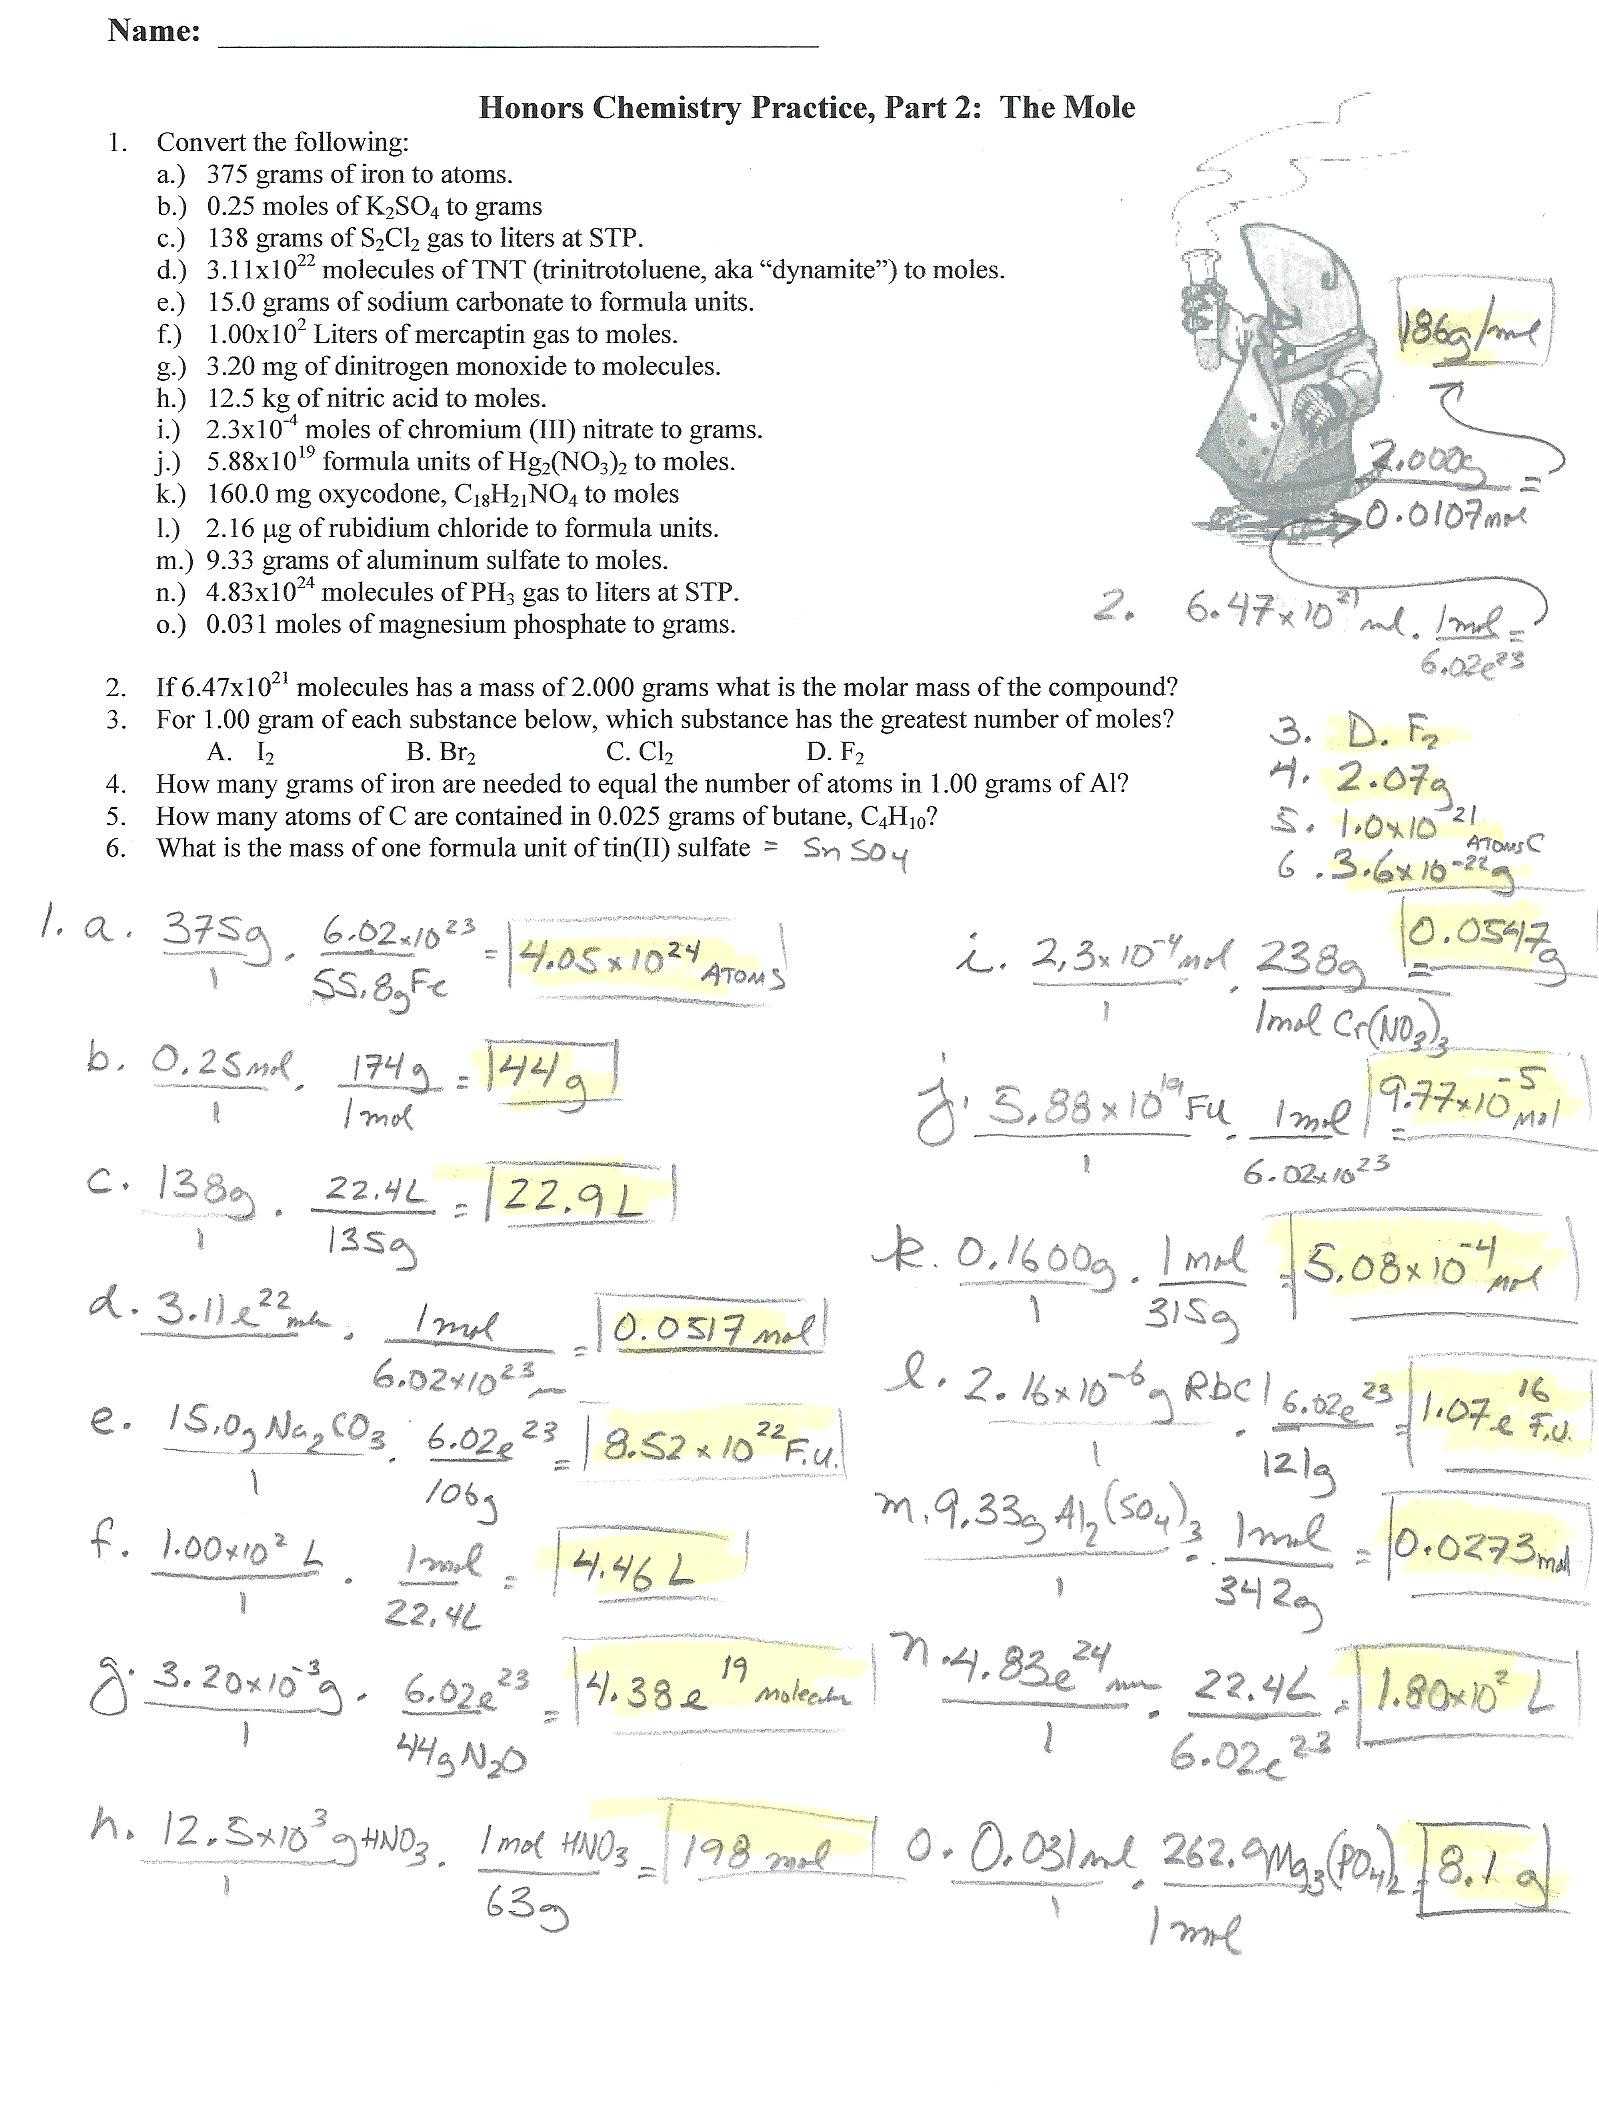 Gas Laws Practice Problems Worksheet Answers as Well as 25 Awesome Gas Laws Practice Problems Worksheet Answers Pics